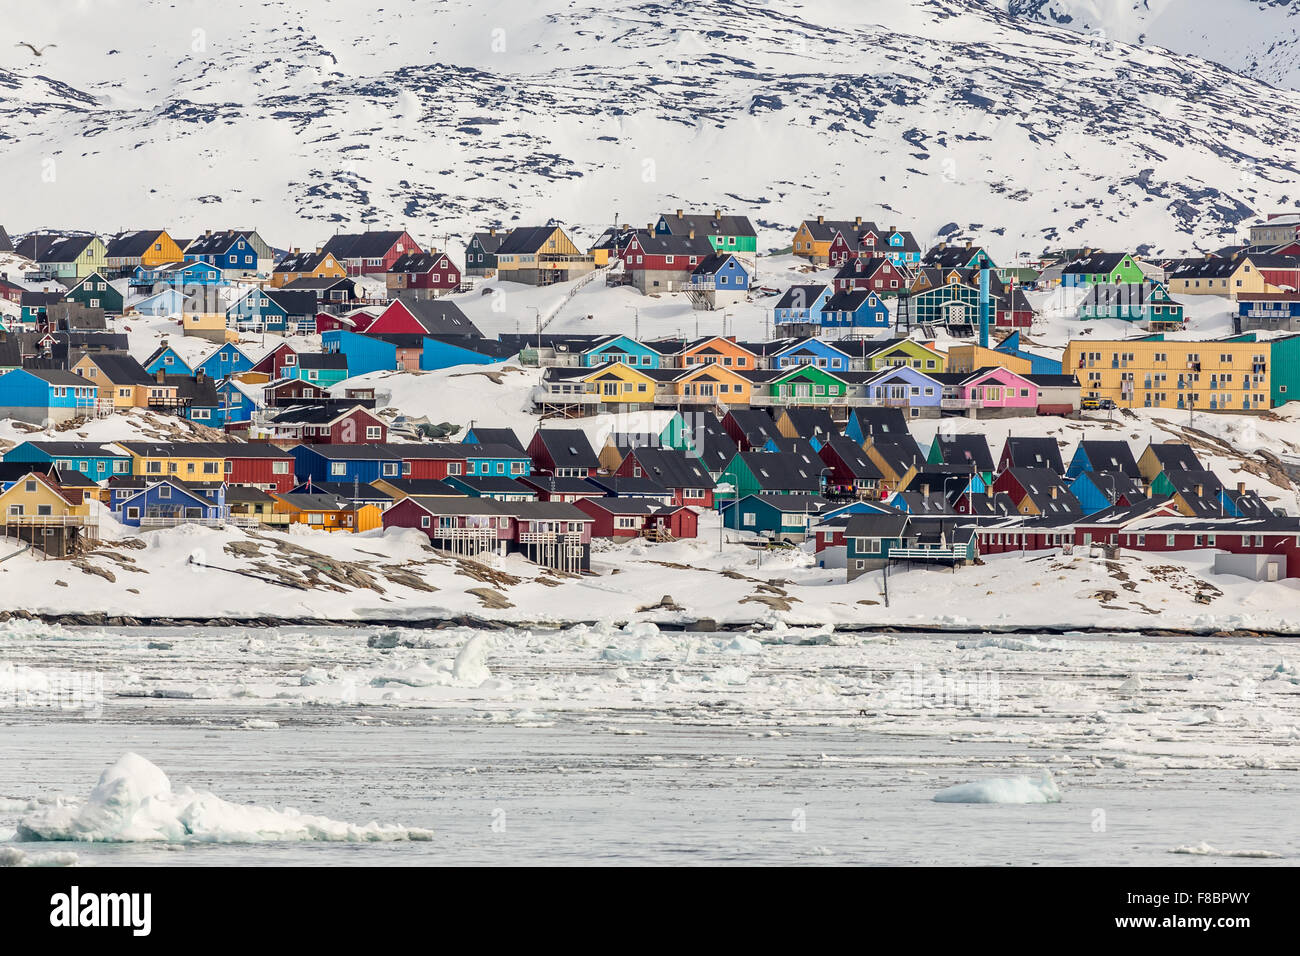 Colorful Ilulissat, North Greenland May 2015 Stock Photo